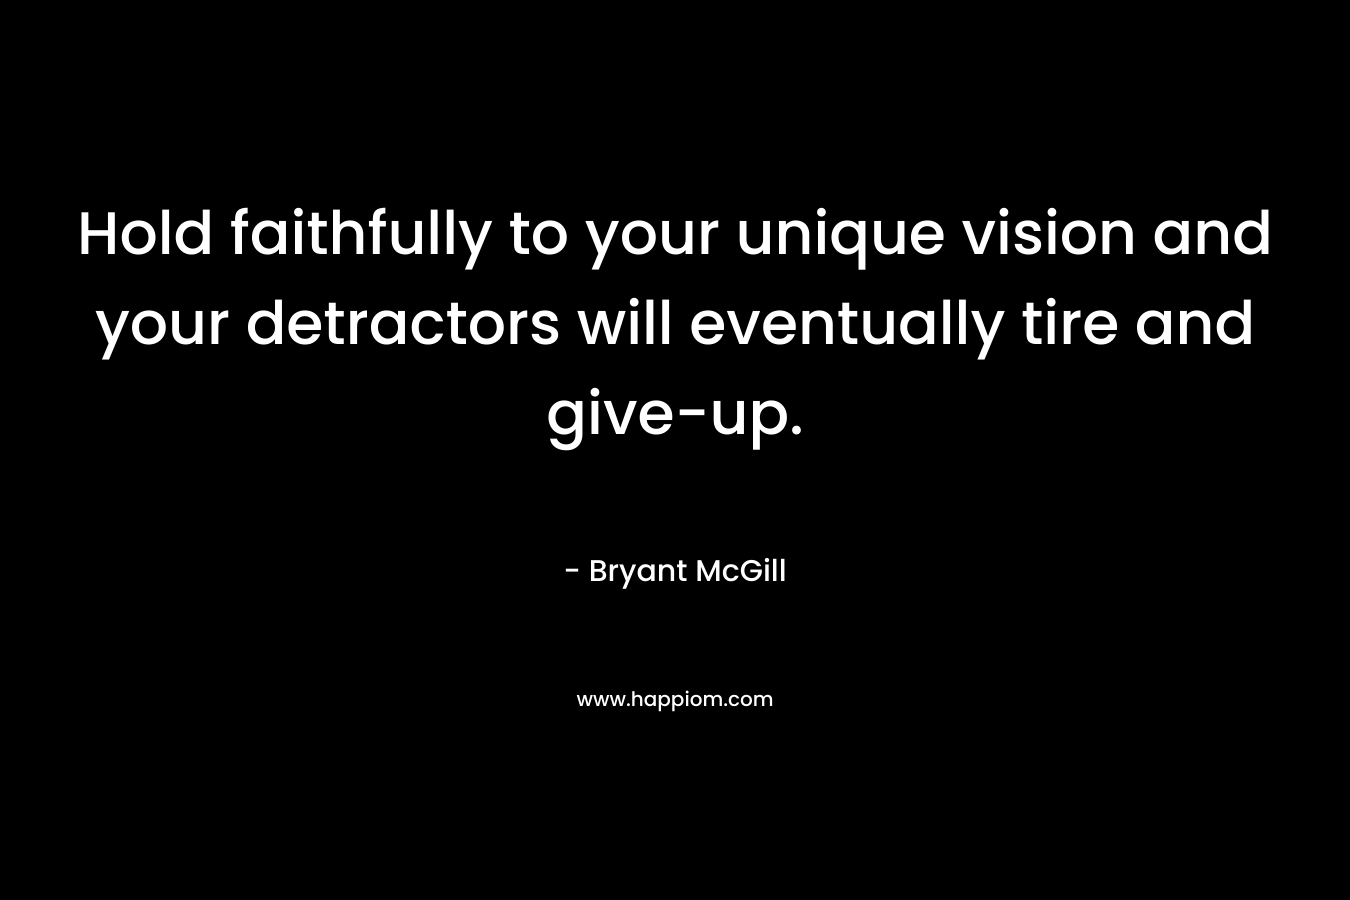 Hold faithfully to your unique vision and your detractors will eventually tire and give-up. – Bryant McGill